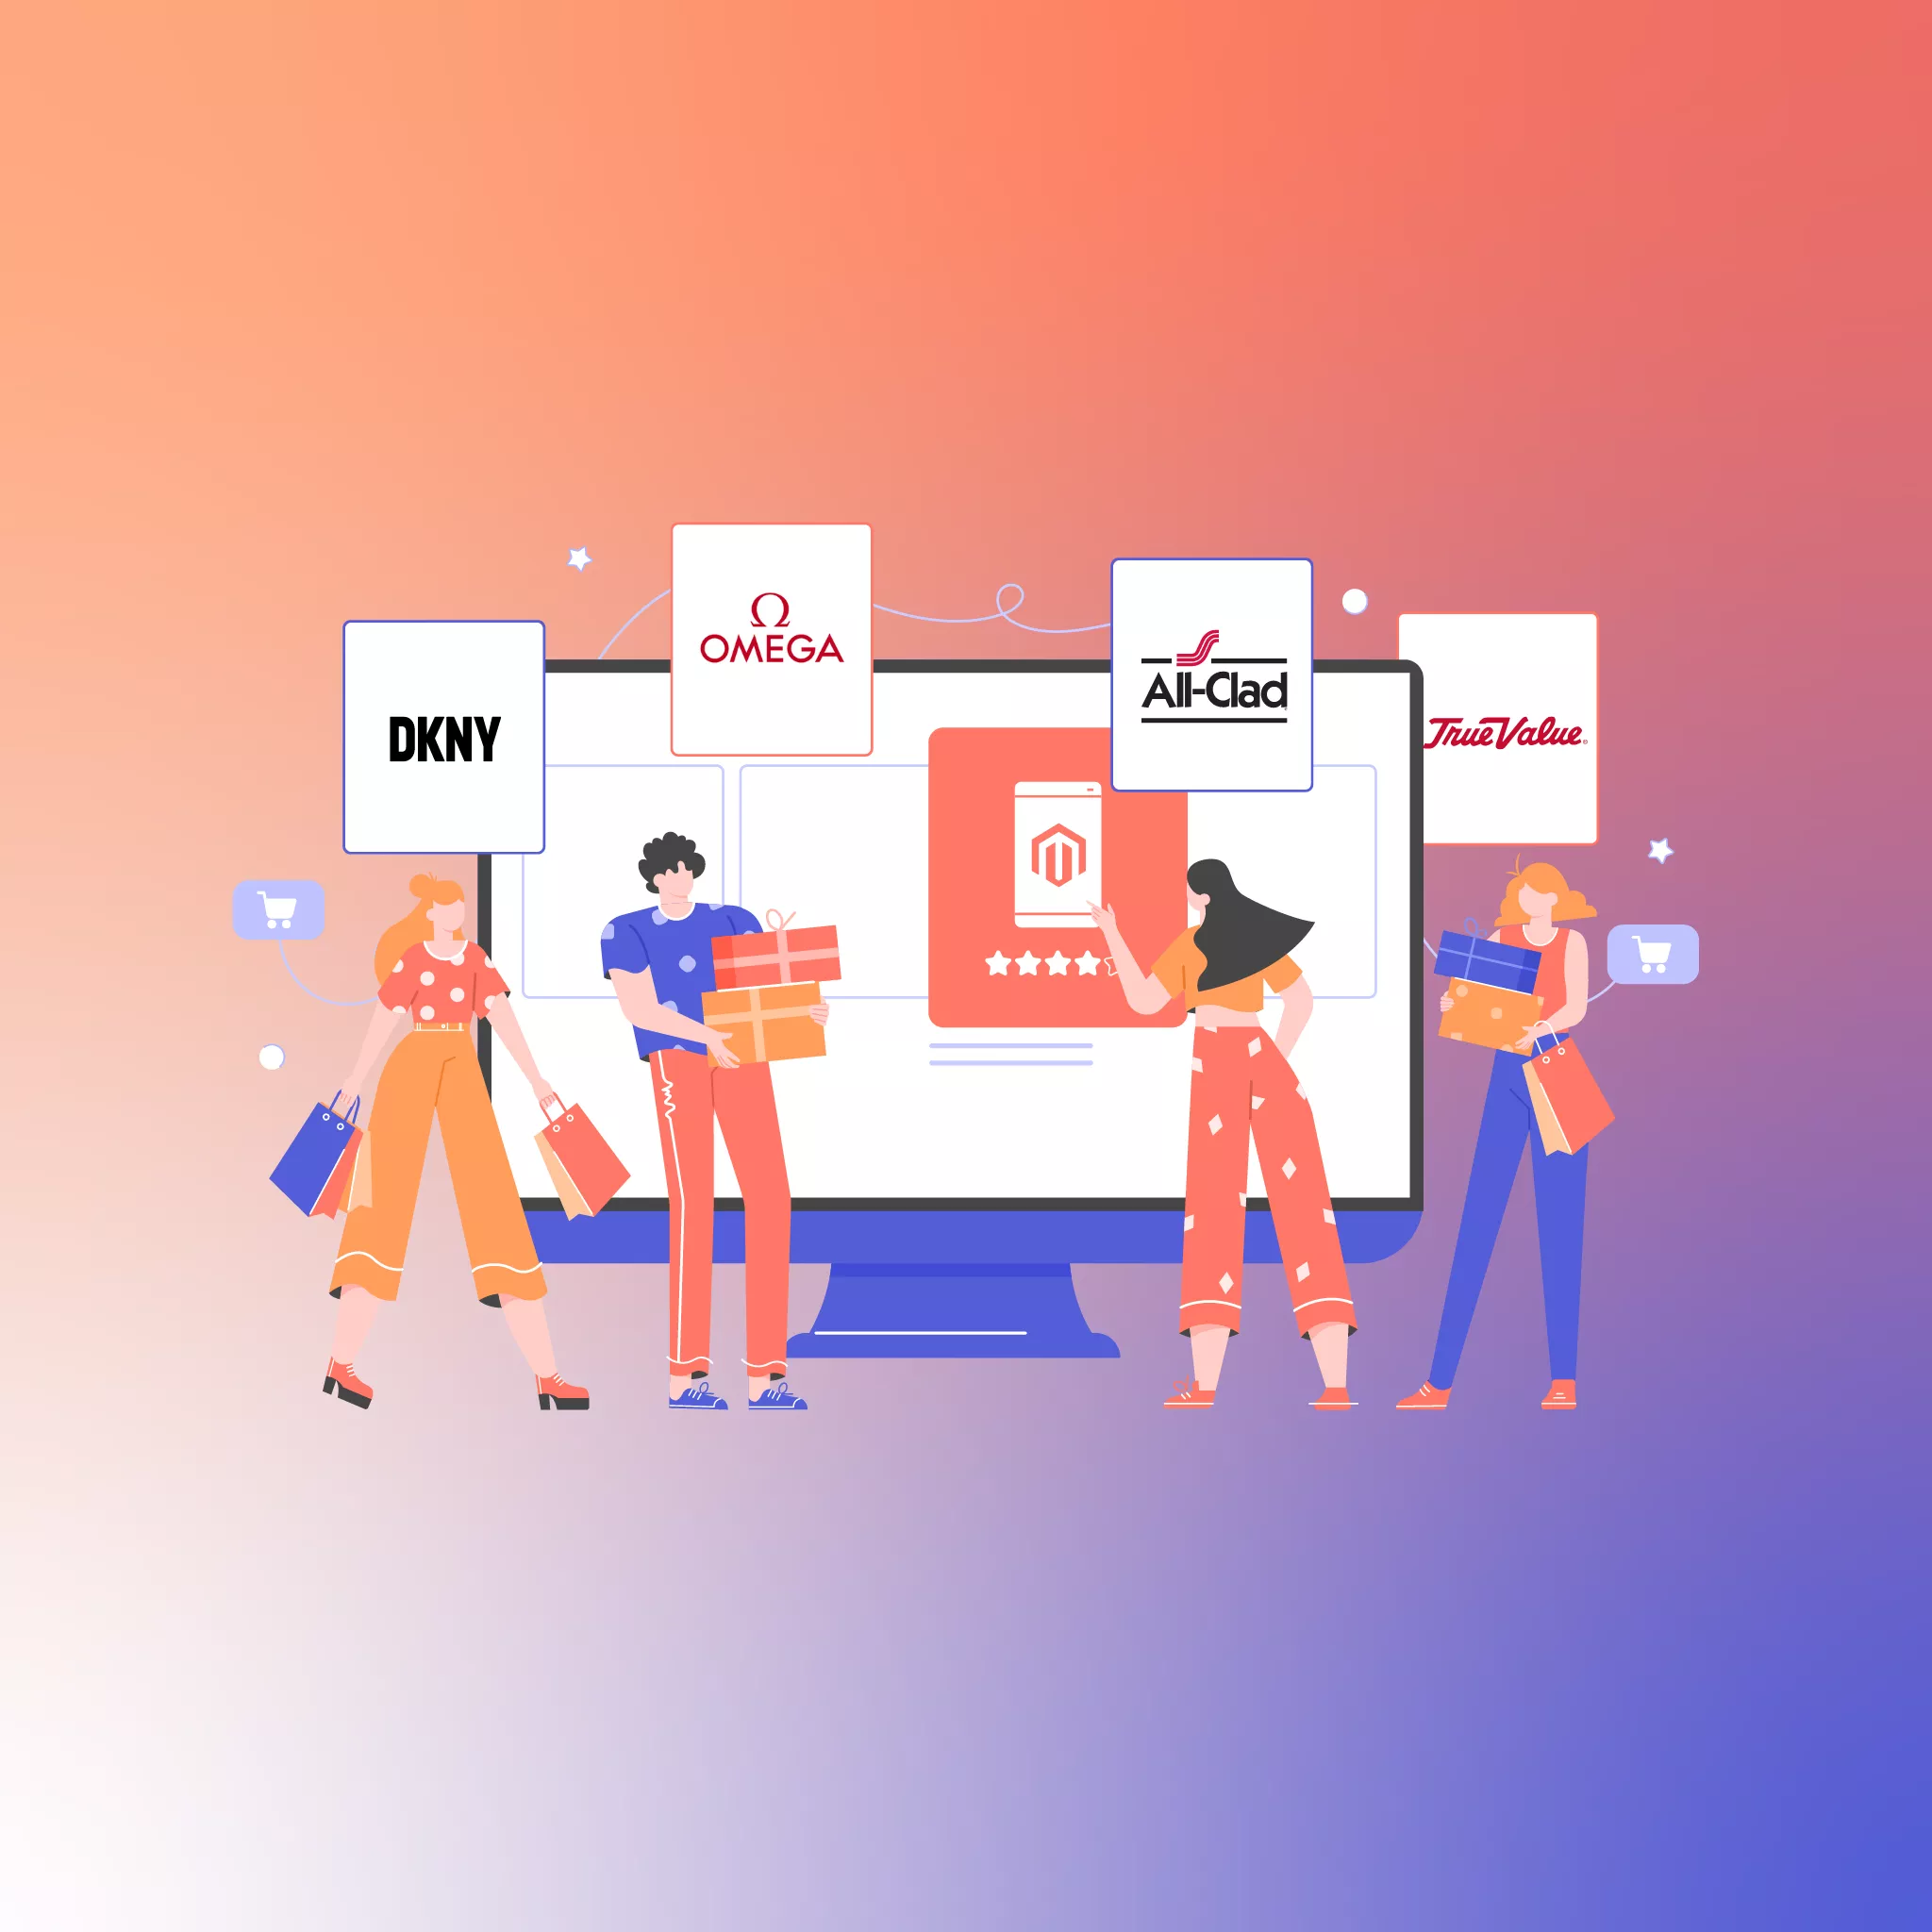 "Featured image illustrating shoppers engaging with various Magento-powered brand websites, highlighted by prominent logos of top brands using the Magento e-commerce platform for the 'Top 75+ Brands Using Magento' article.